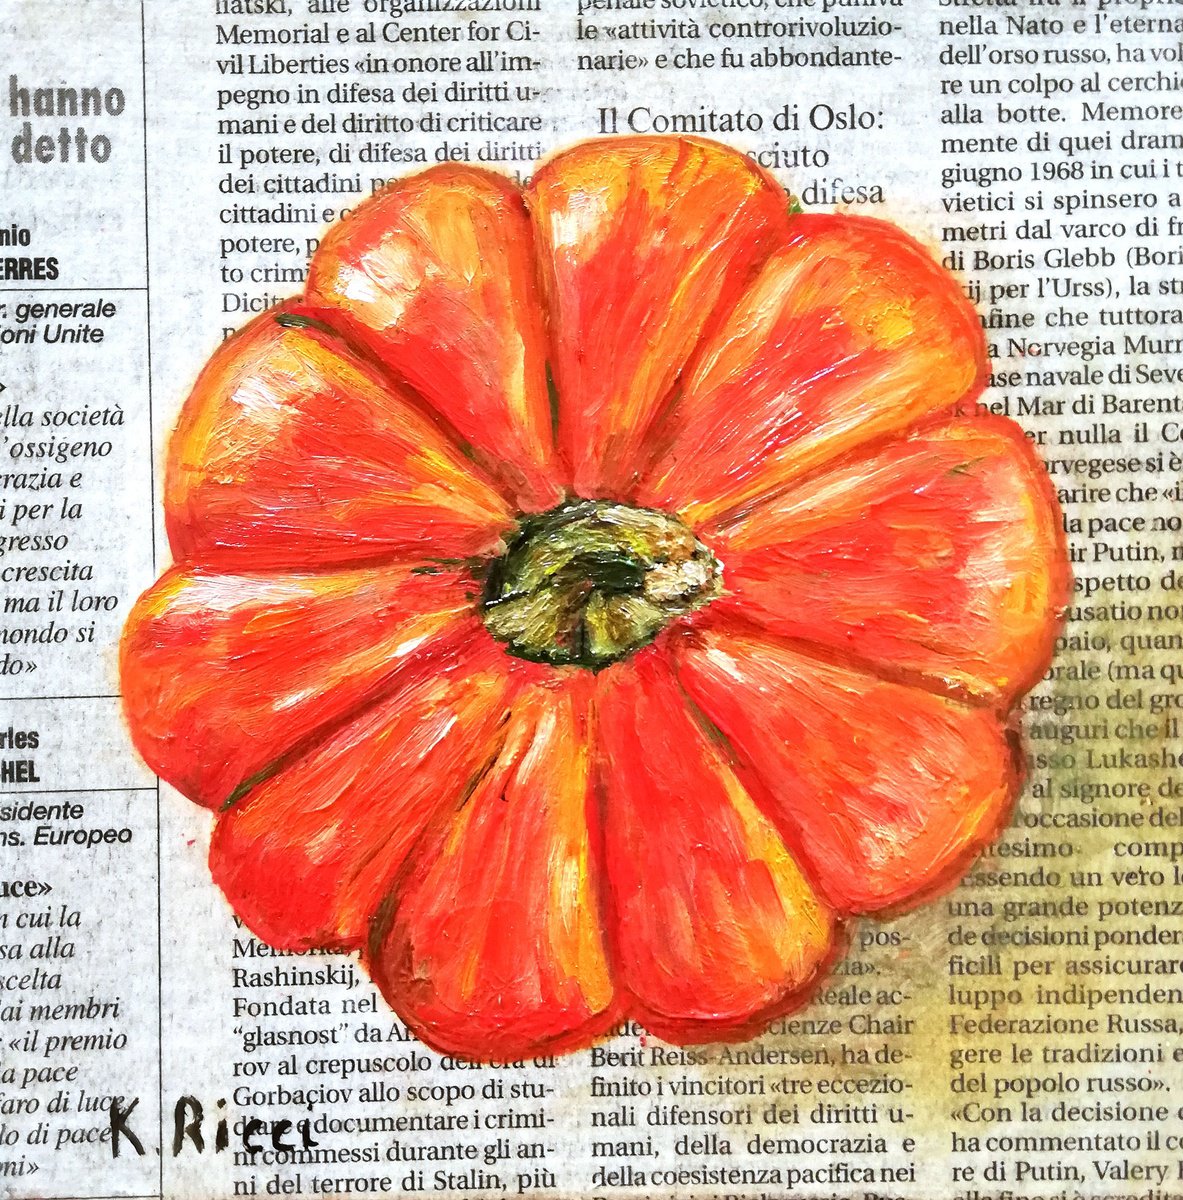 Pumpkin on Newspaper Original Oil on Canvas Board Painting 6 by 6 inches (15x15 cm) by Katia Ricci